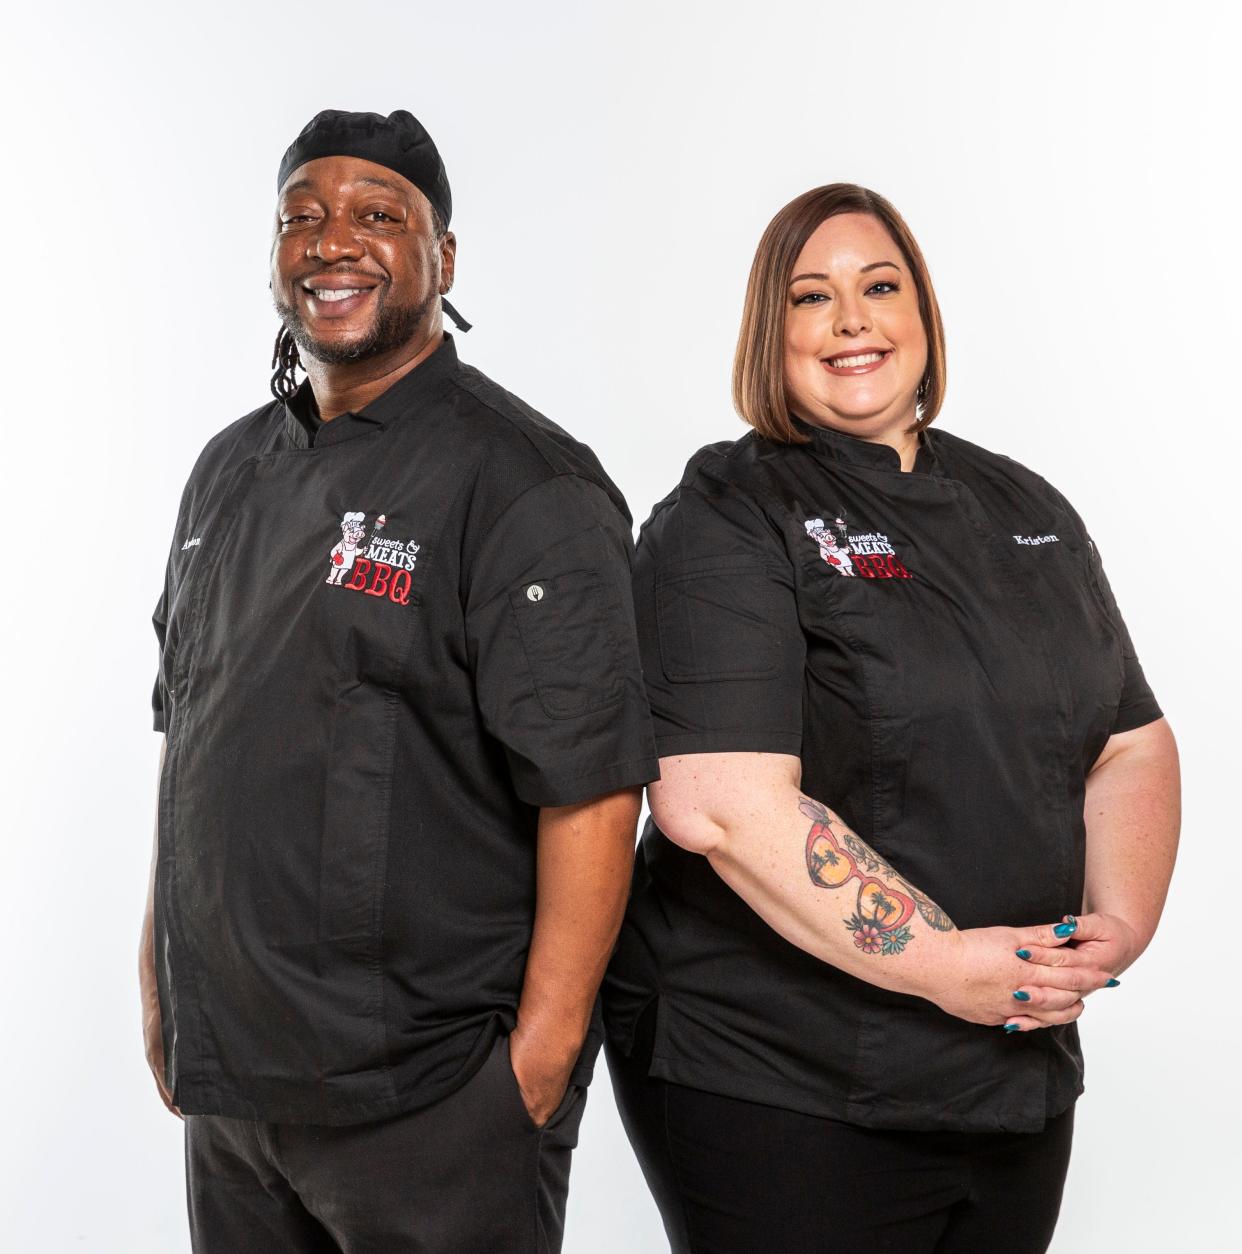 Cincinnati residents Kristen Bailey and Anton Gaffney co-founded Sweets & Meats BBQ in 2014.